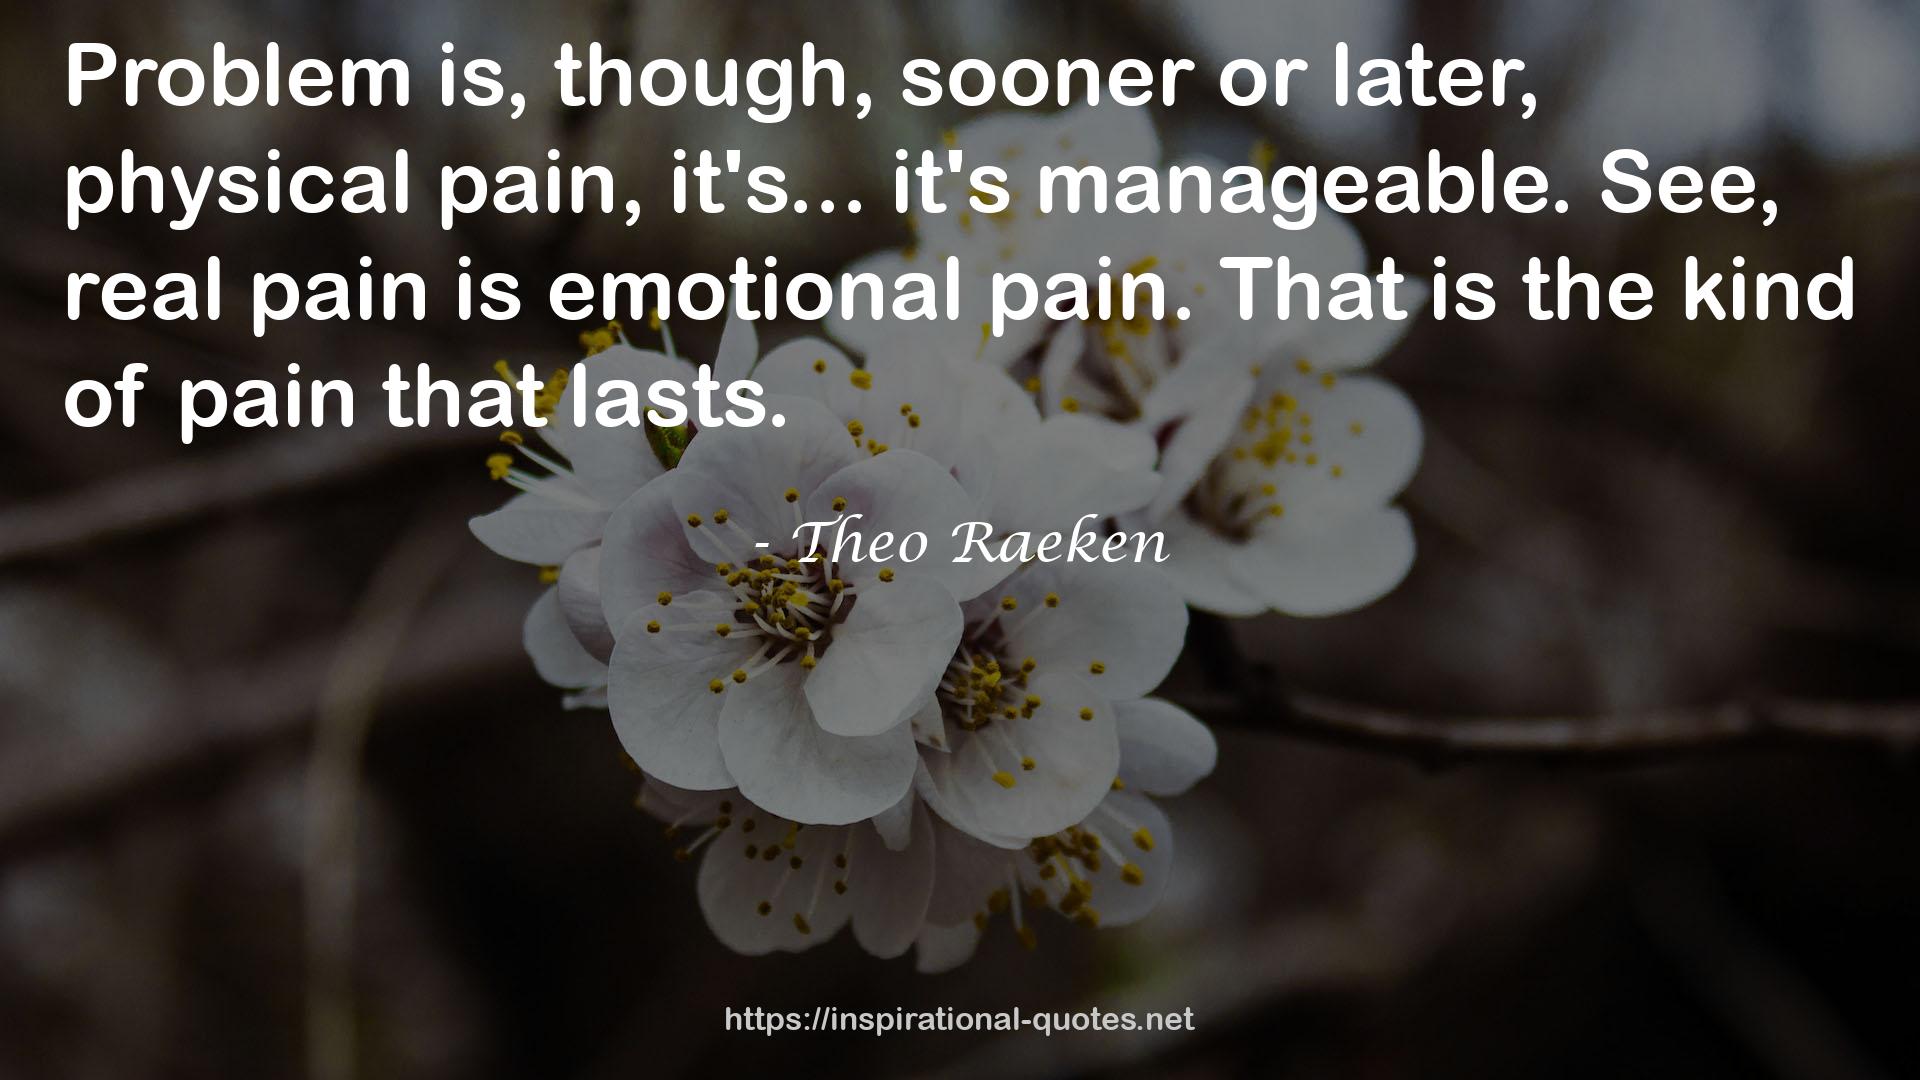 Theo Raeken QUOTES